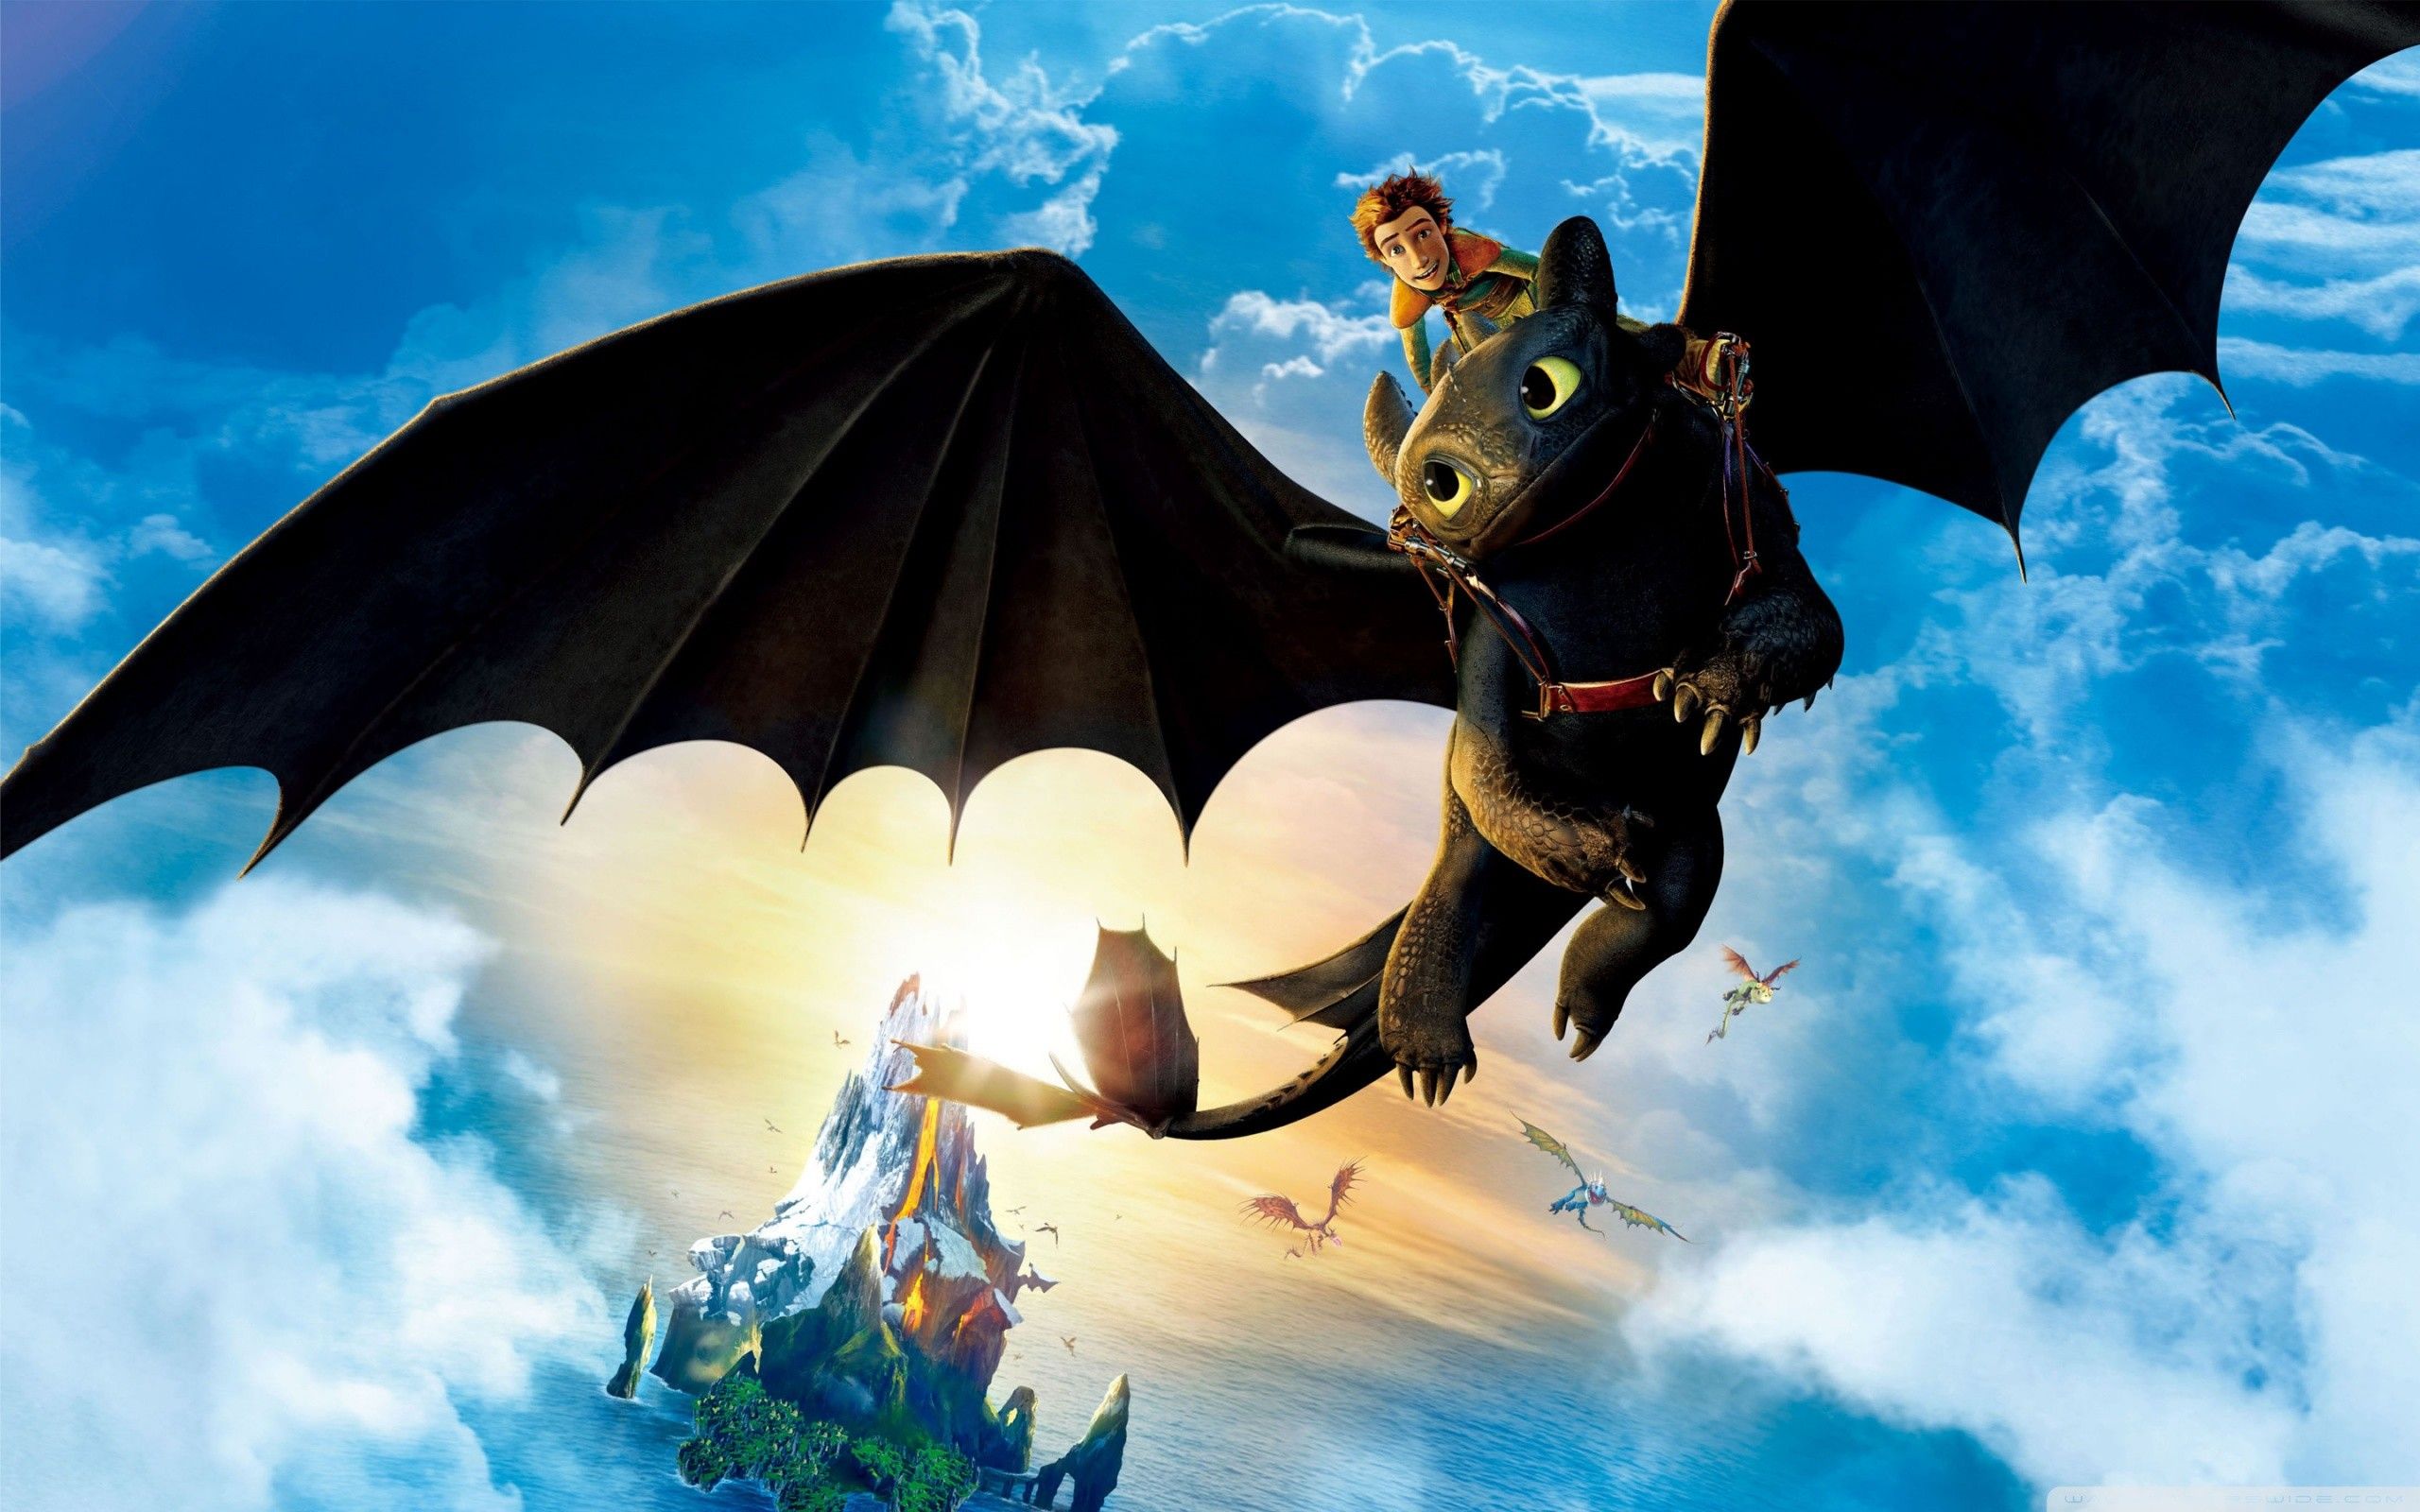 How To Train Your Dragon 4K Wallpaper Free How To Train Your Dragon 4K Background